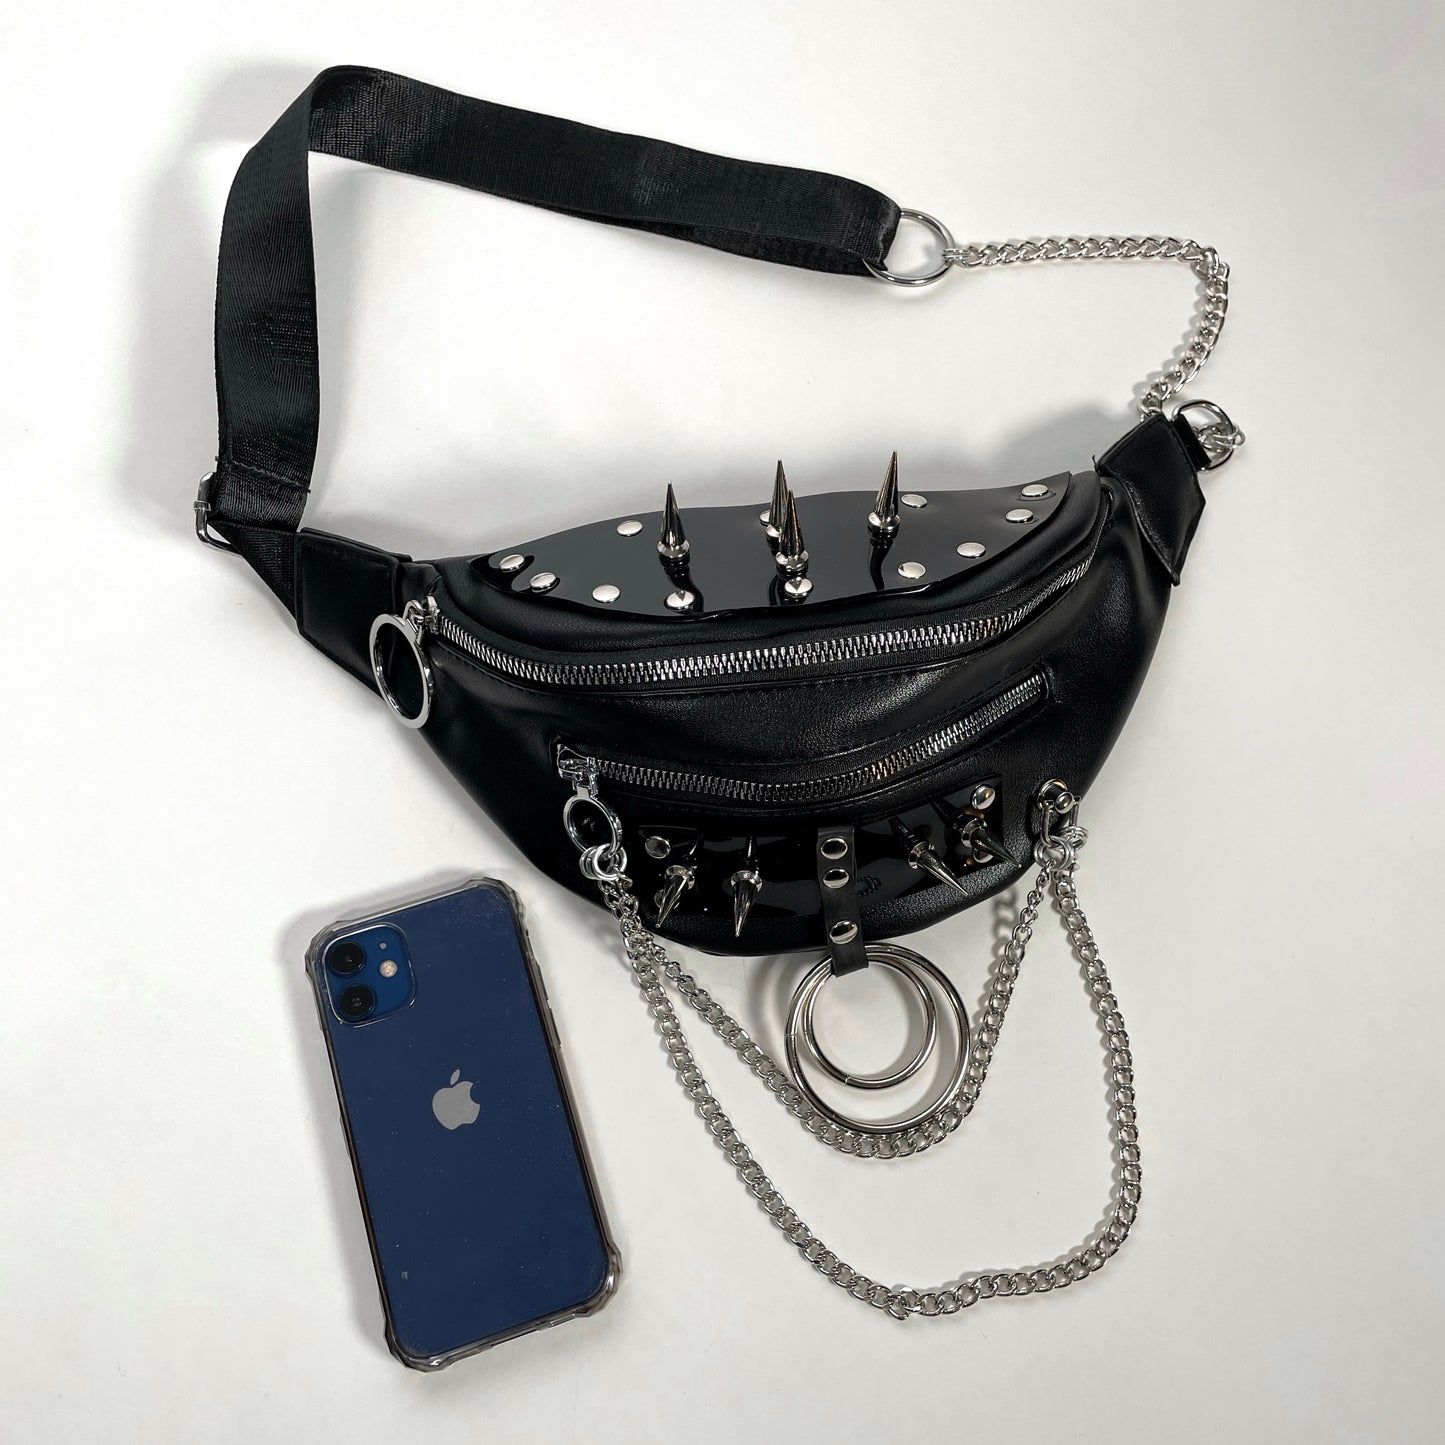 Crossbody "Fanny-Pack" Bag with PVC, Spikes, O-rings and Chains